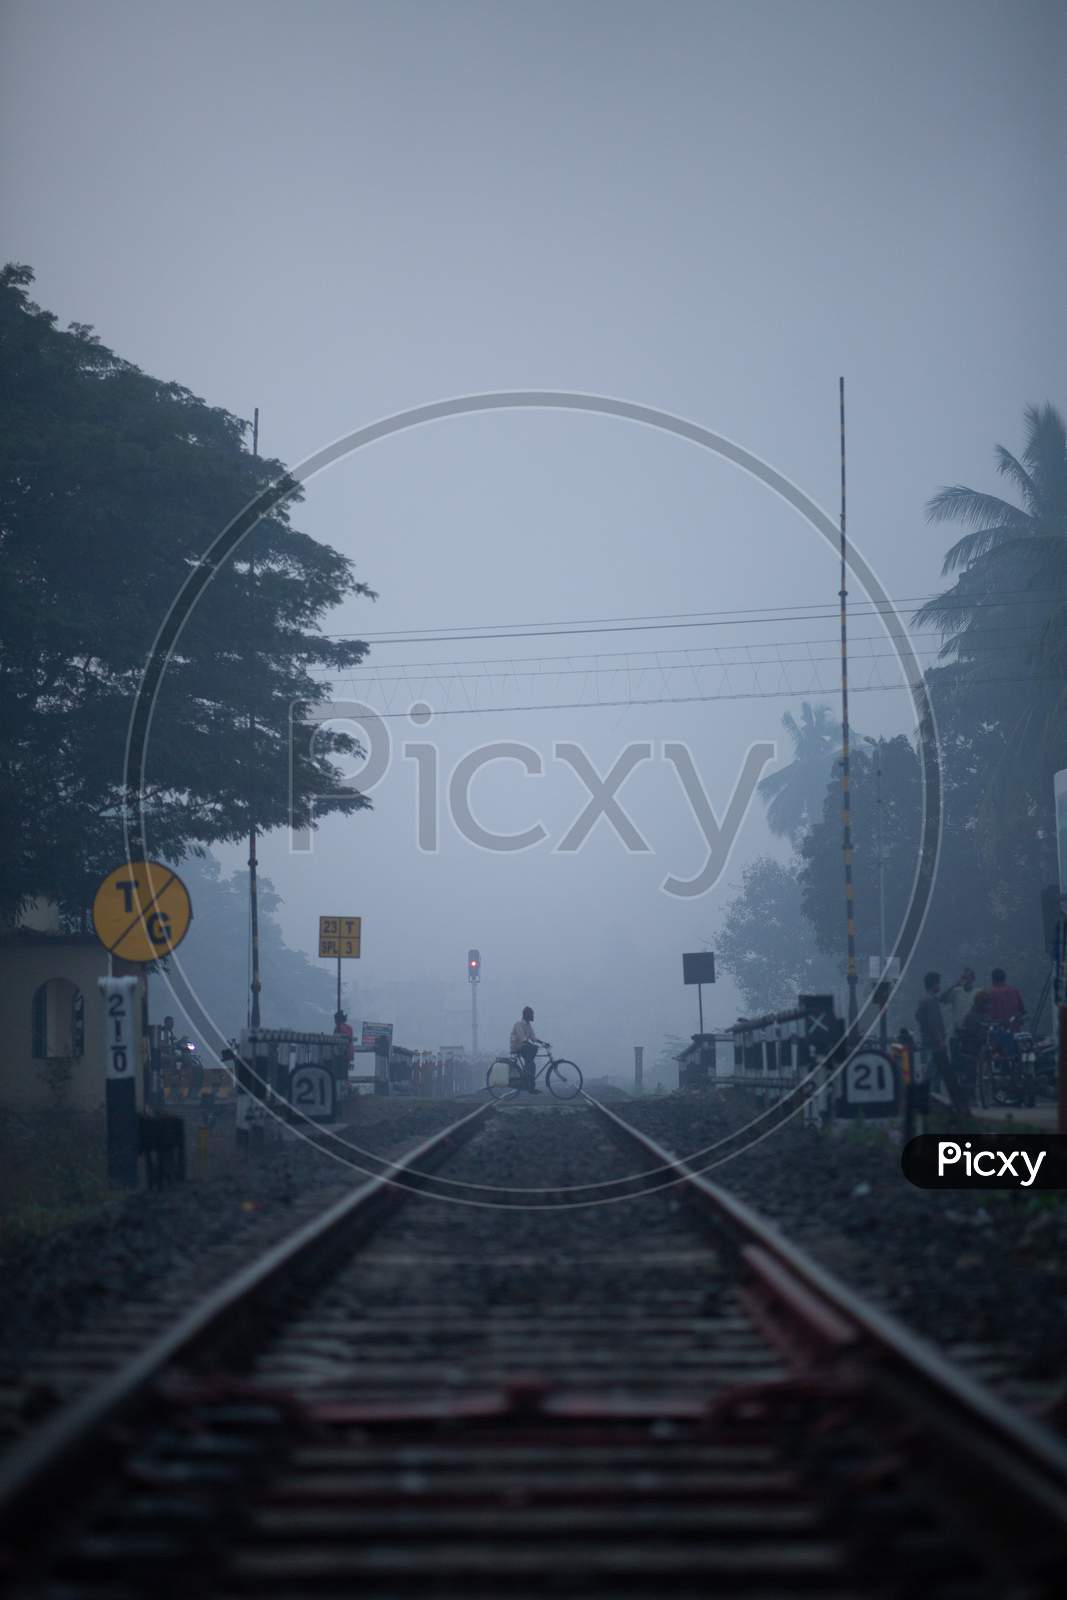 A Railway Gate View during early morning